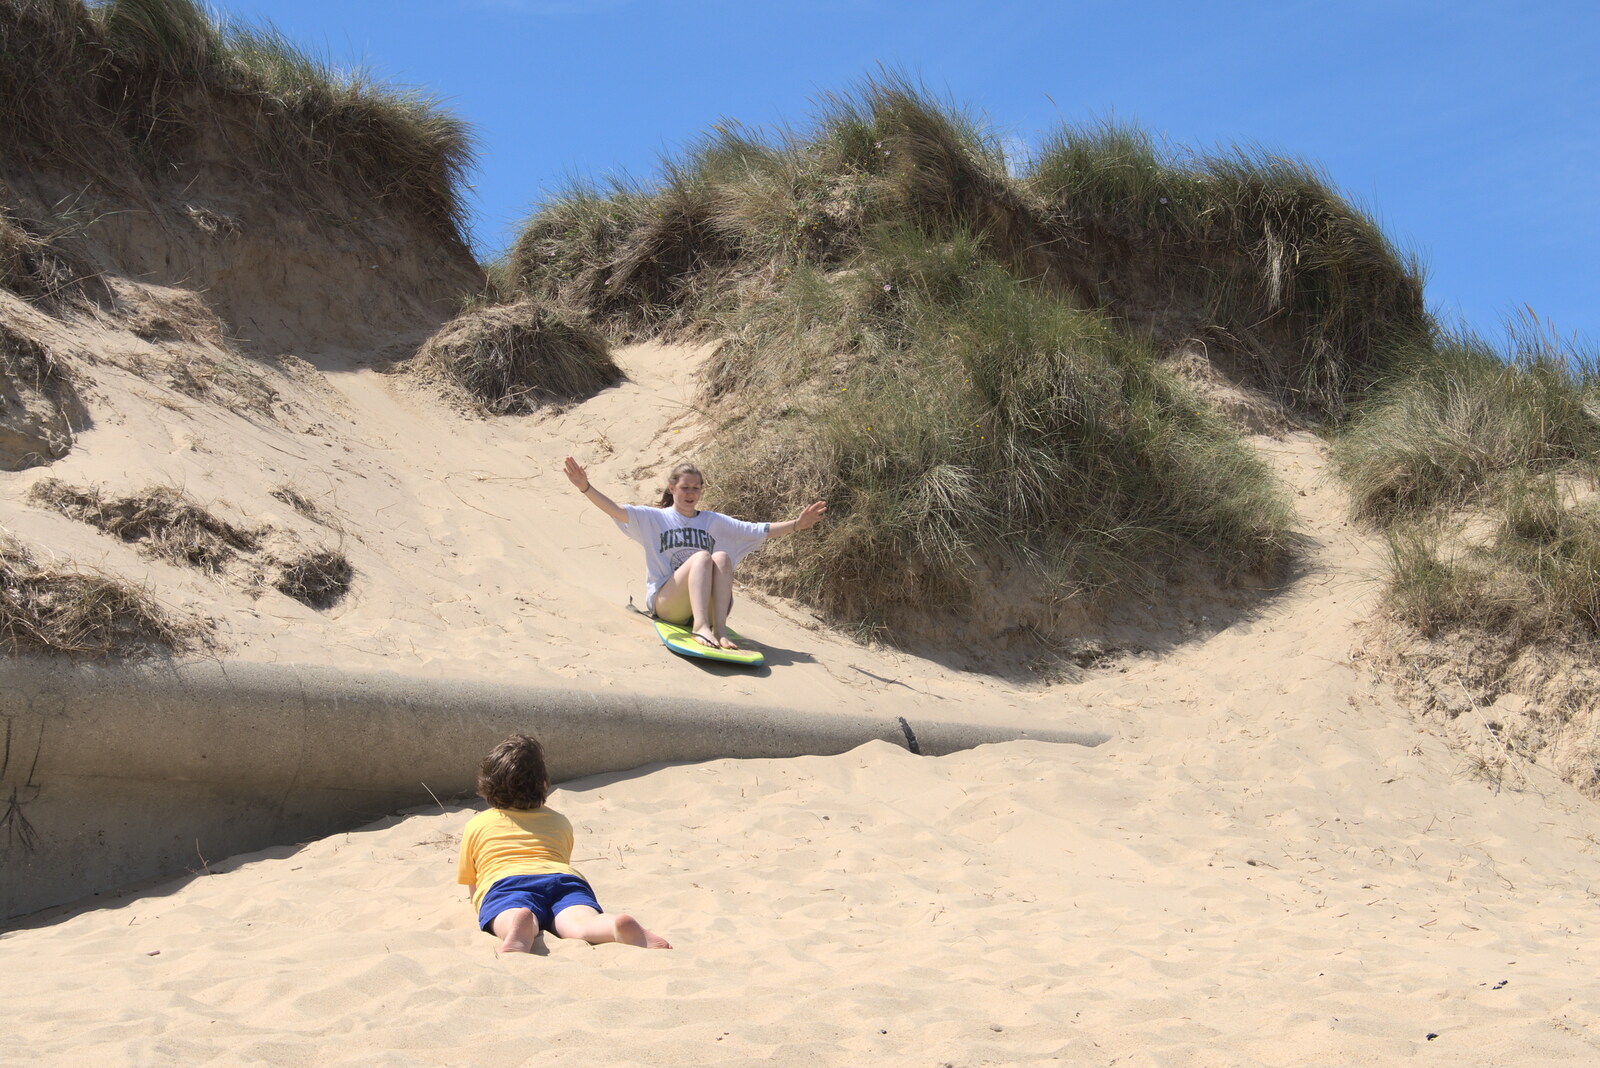 Sophie does some sand surfing from Camping in the Dunes, Waxham Sands, Norfolk - 9th July 2022